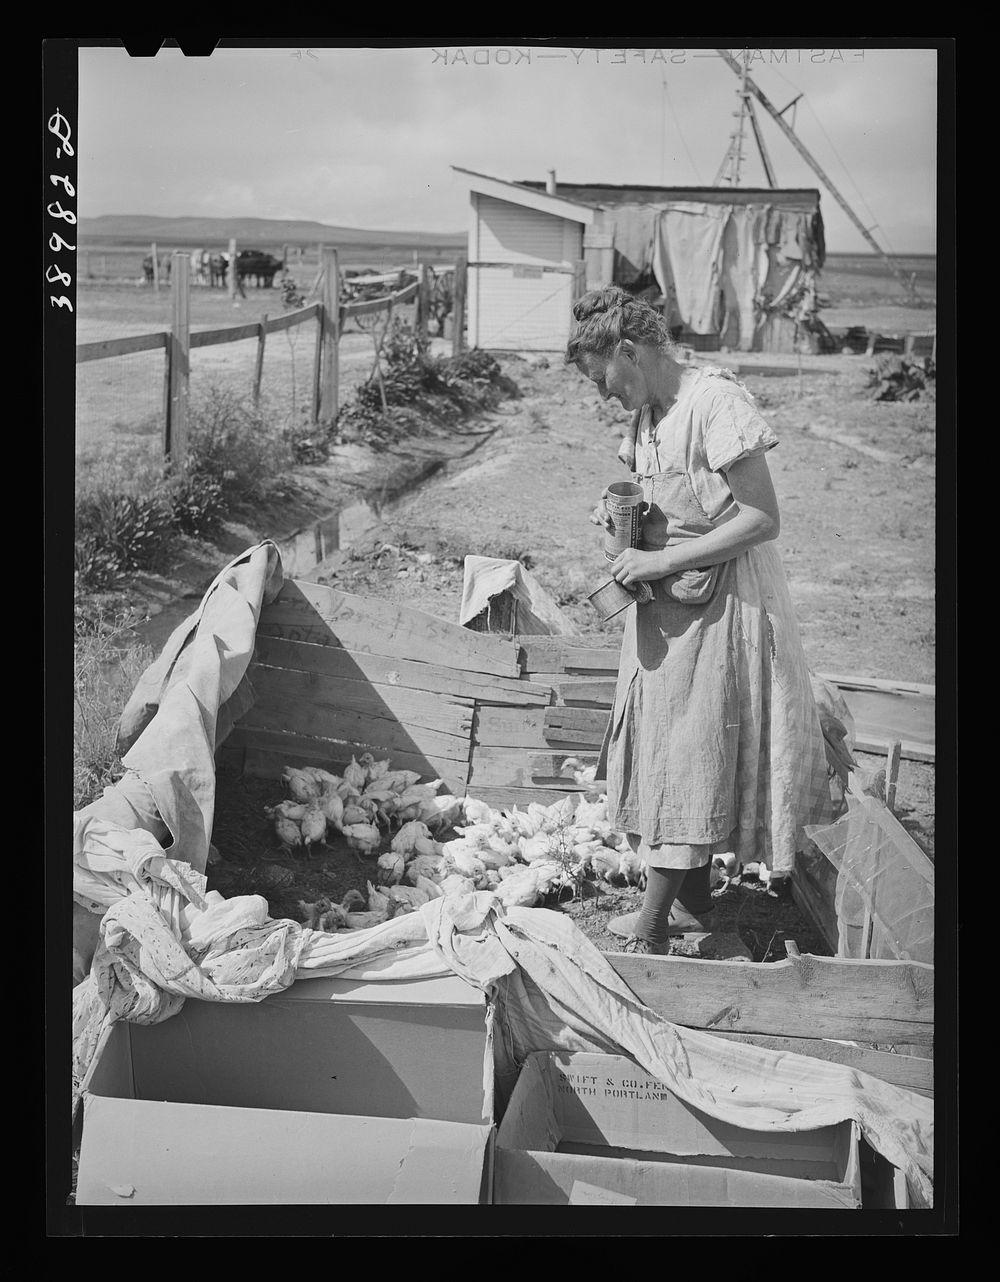 Mrs. Free with her chickens. She is wife of FSA (Farm Security Administration) rehabilitation borrower. Dead Ox Flat…